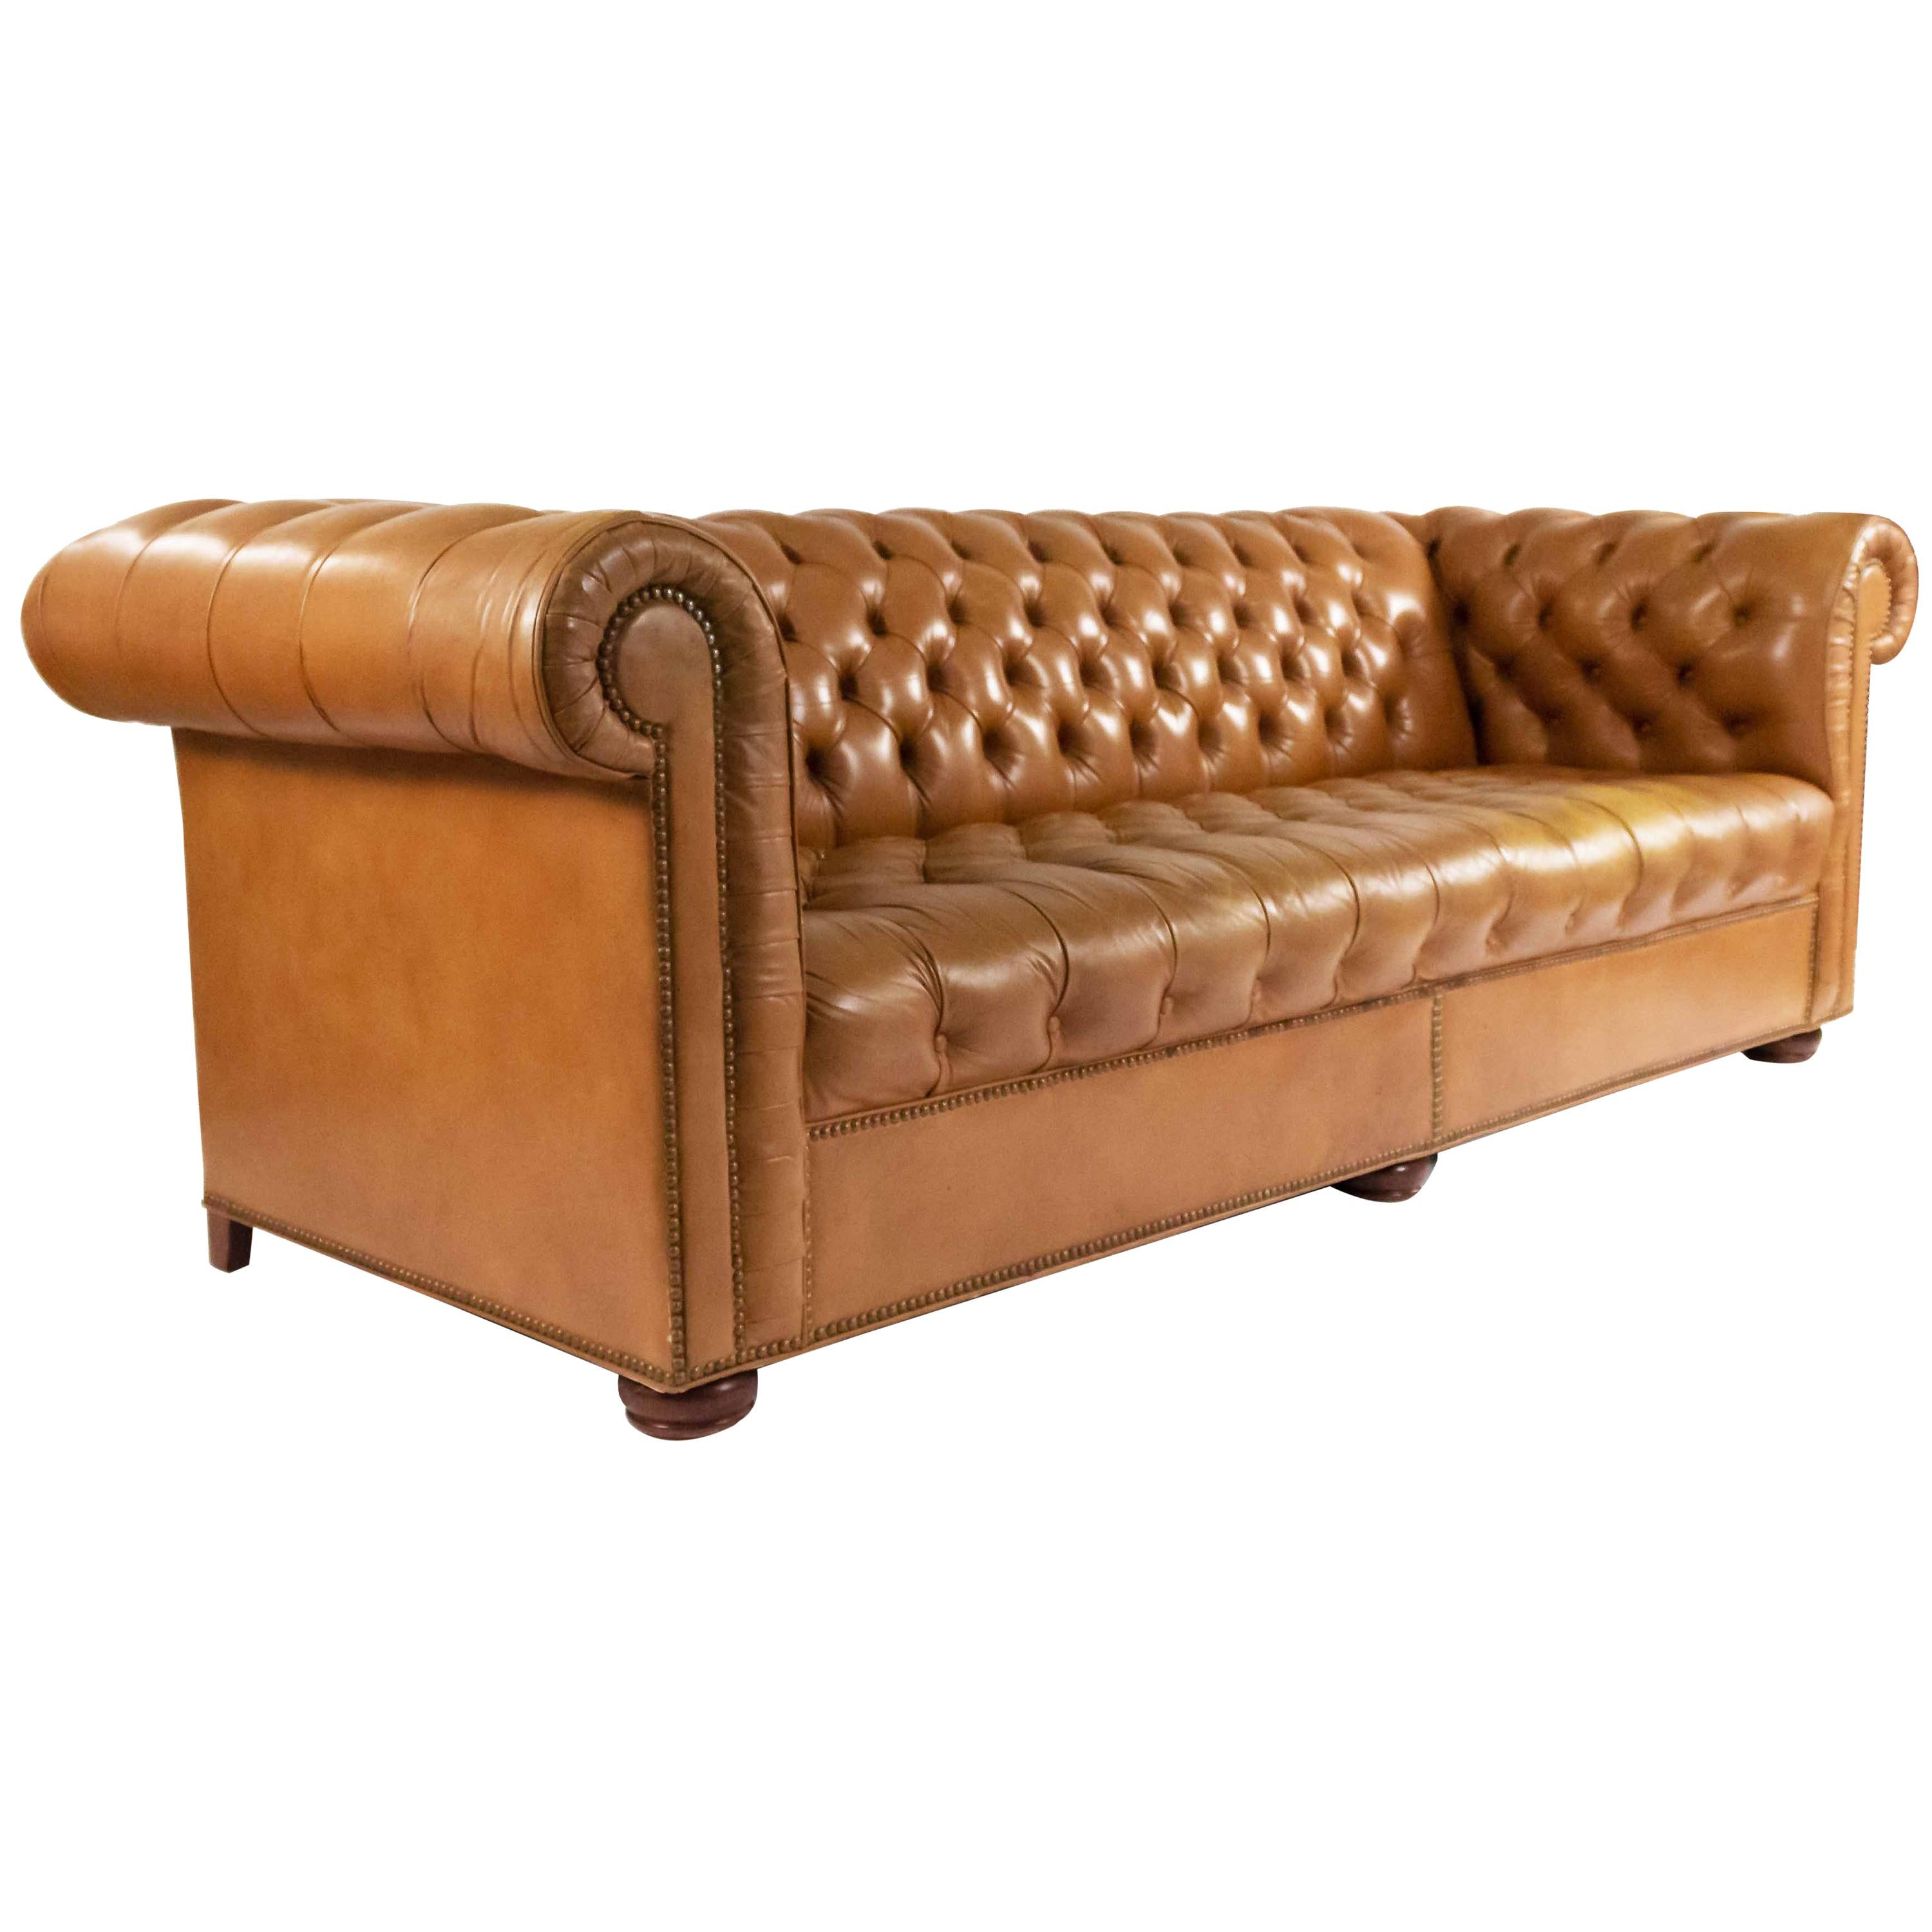 Tobacco Brown Leather Chesterfield Sofa